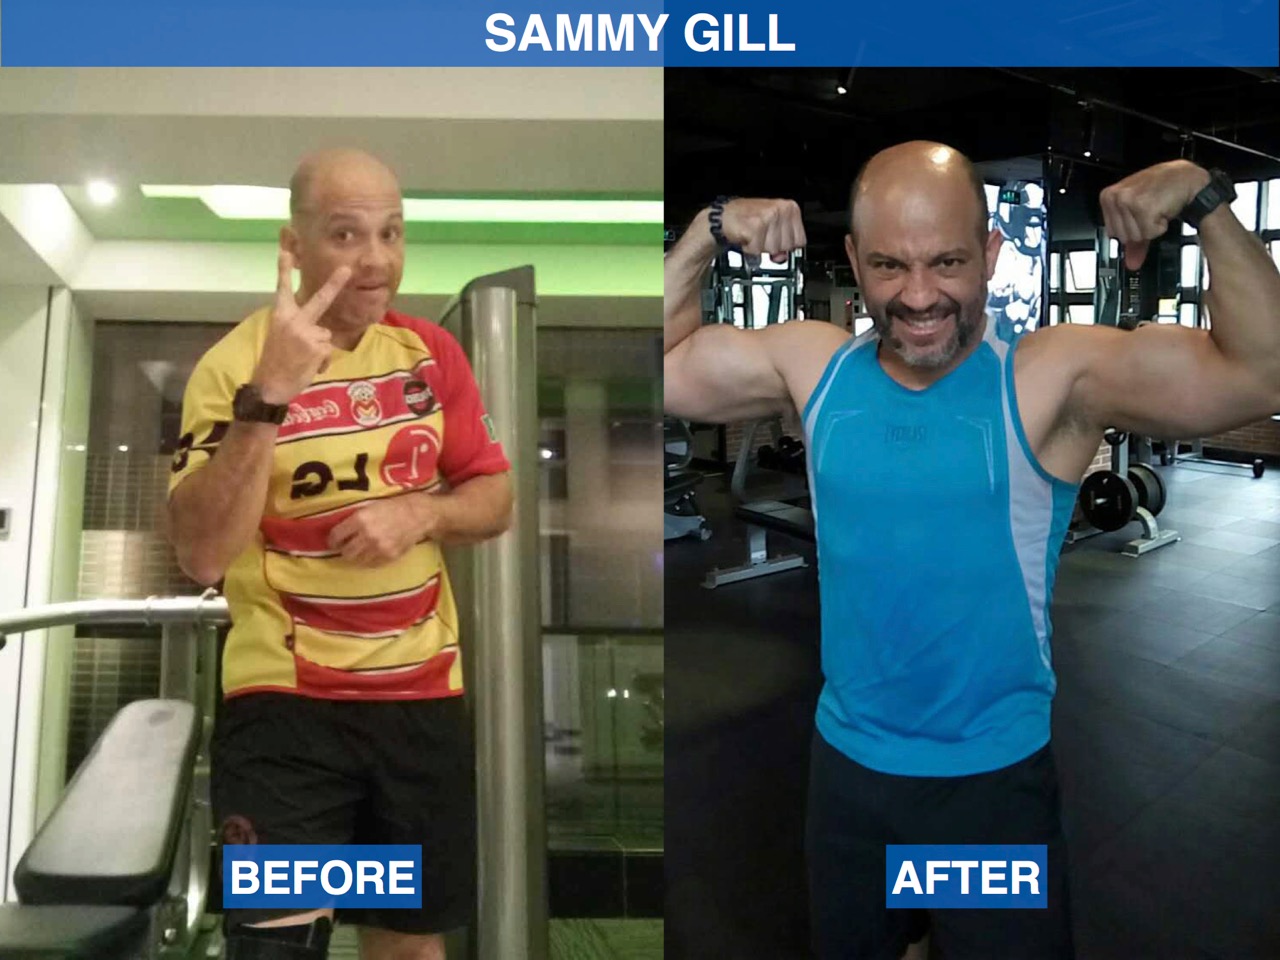 Sammy-gill-k2fit-peoples-choice